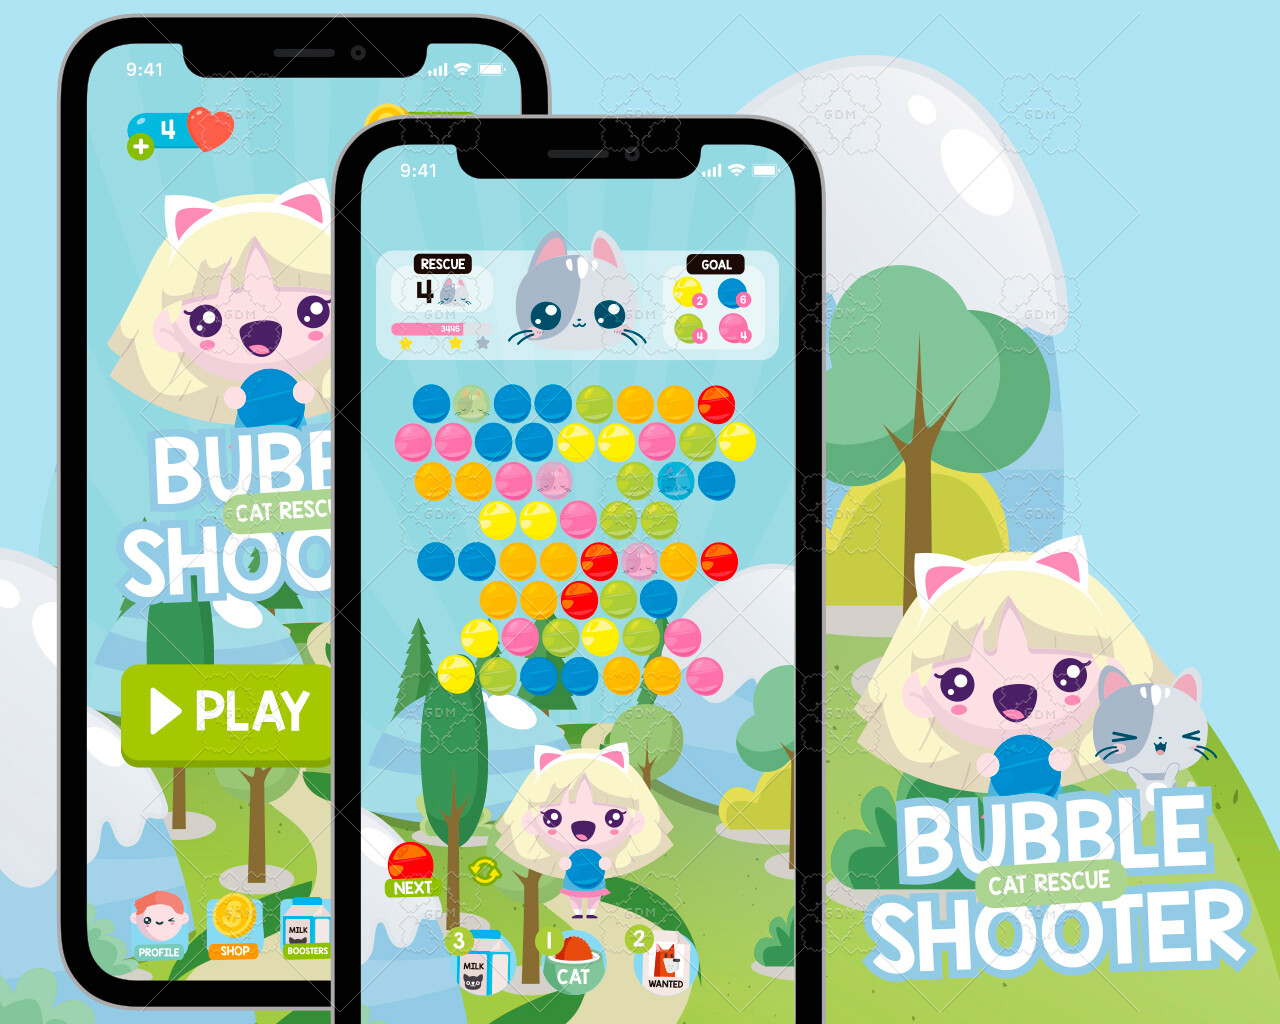 Bubble shooter game assets Royalty Free Vector Image